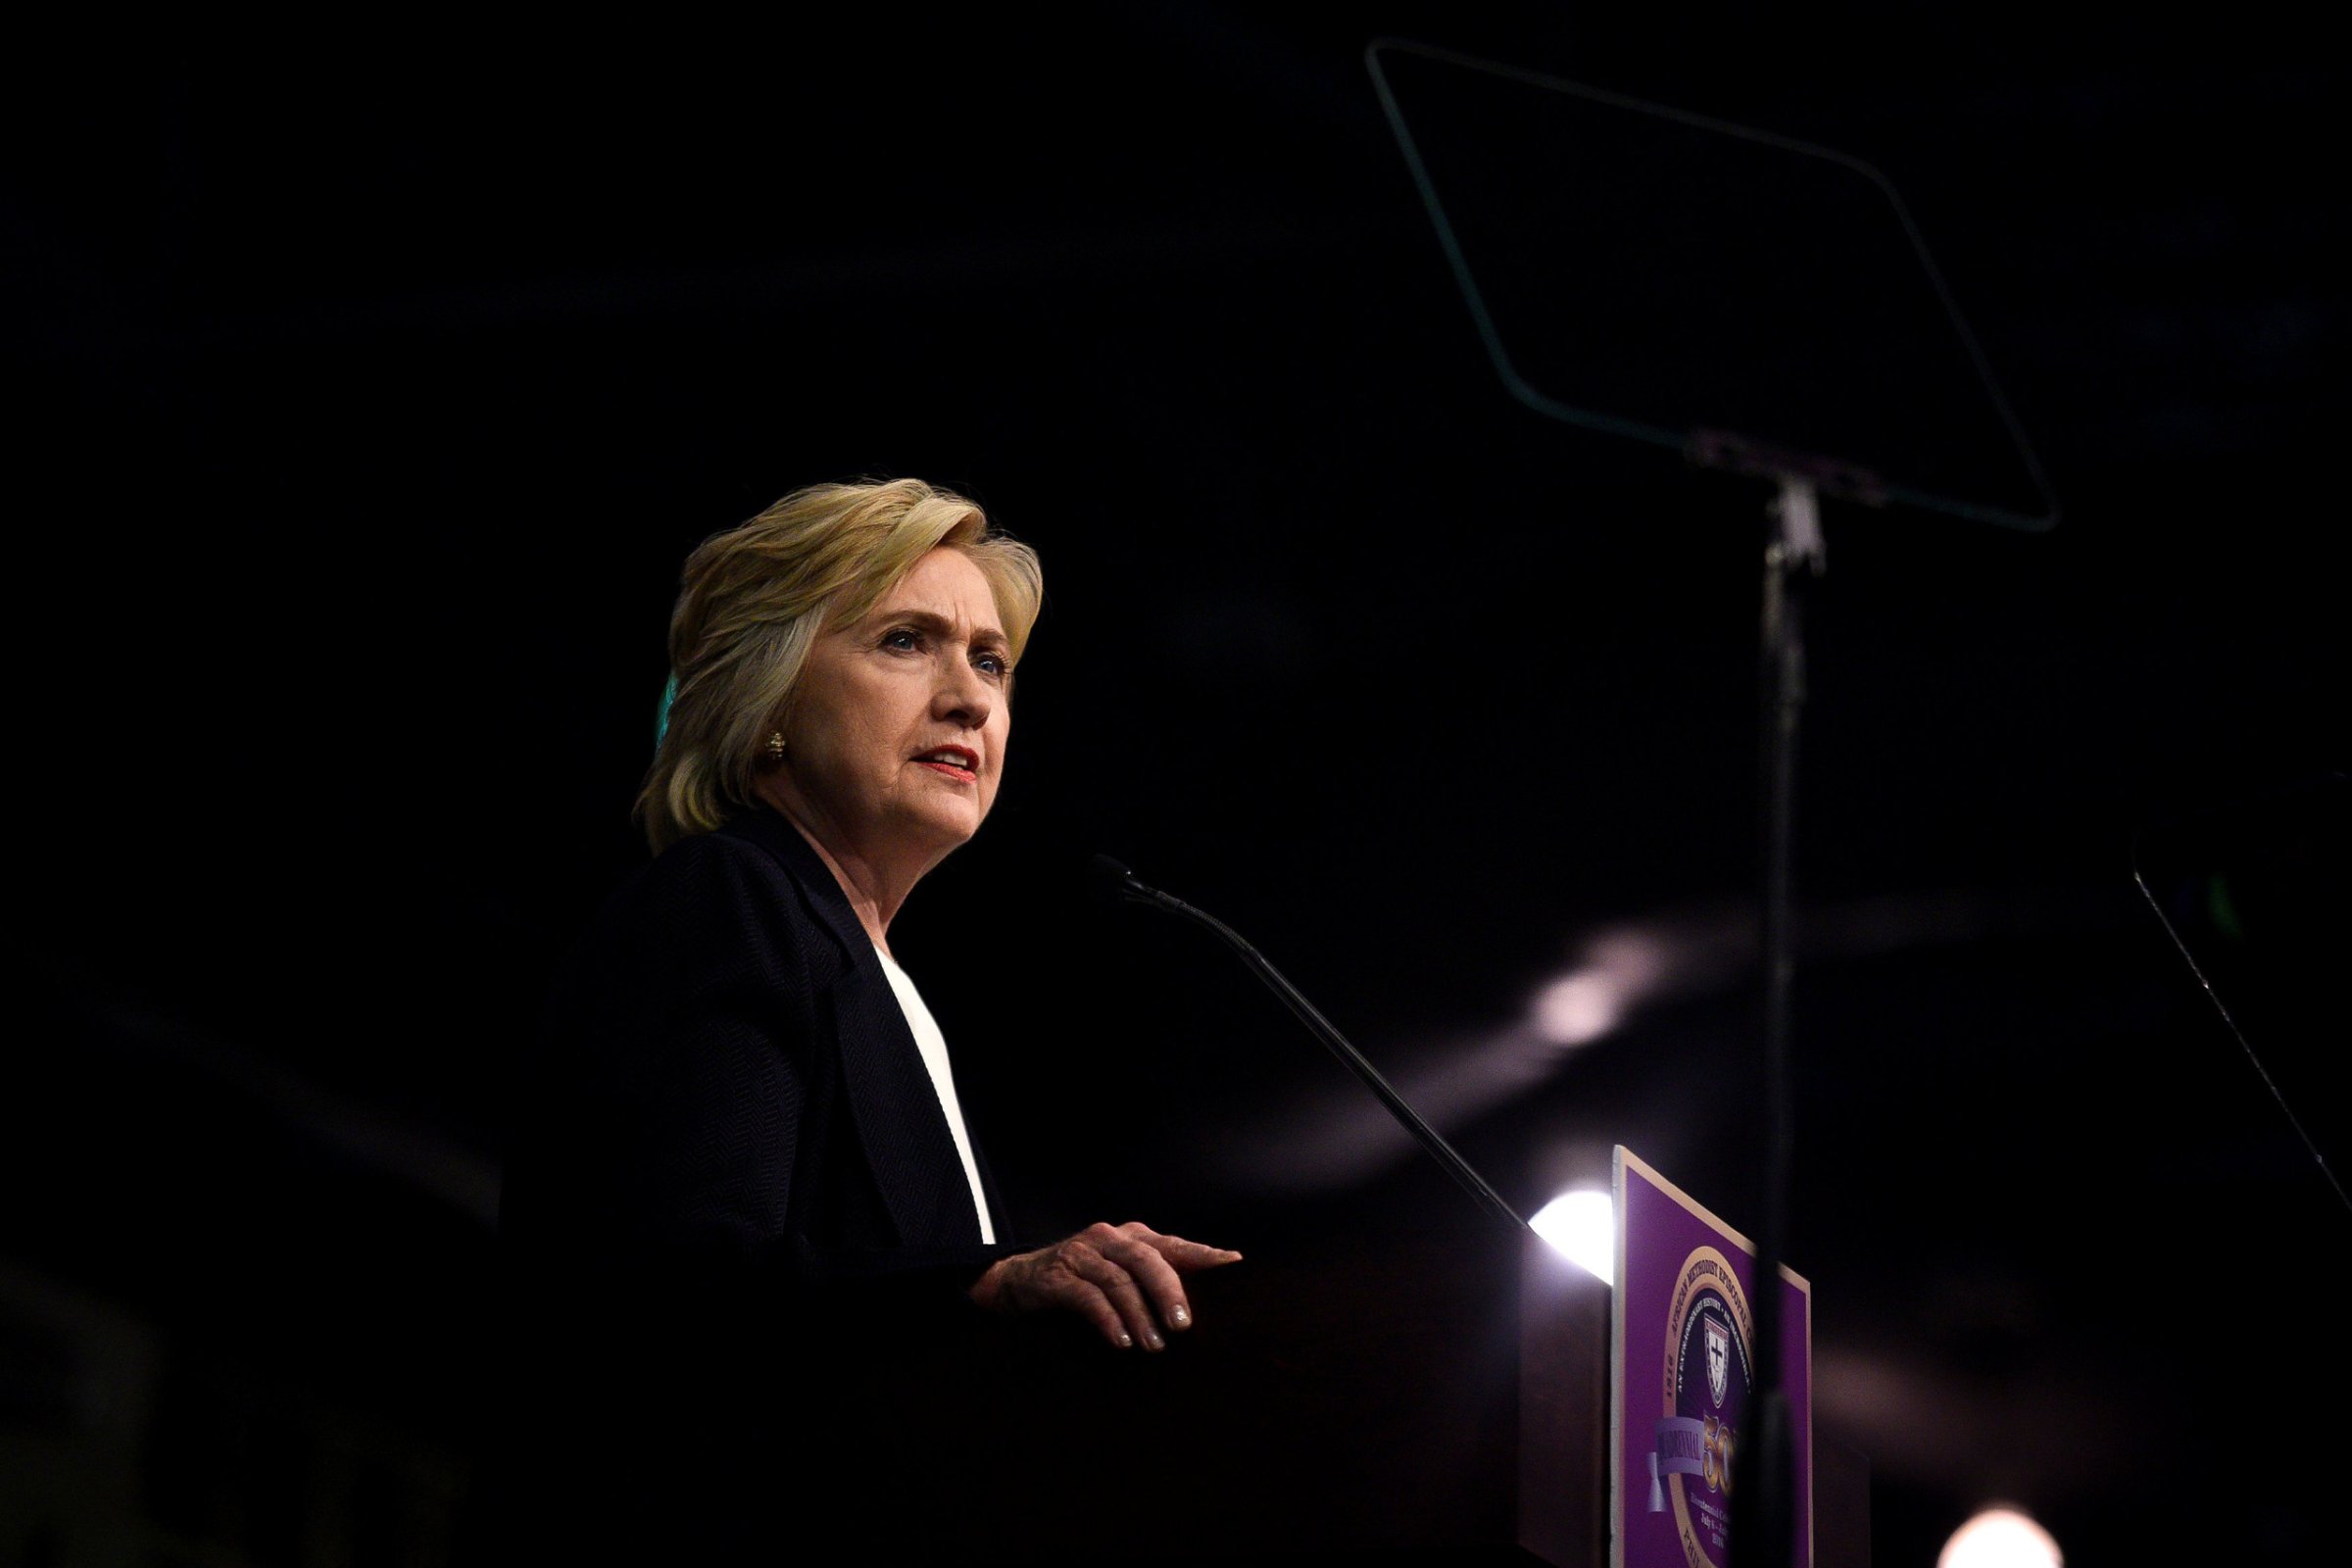 Democratic Presidential candidate Hillary Clinton speaks to the General Conference of the African Methodist Episcopal Church during their annual convention at the Pennsylvania Convention Center in Philadelphia on July 8, 2016.